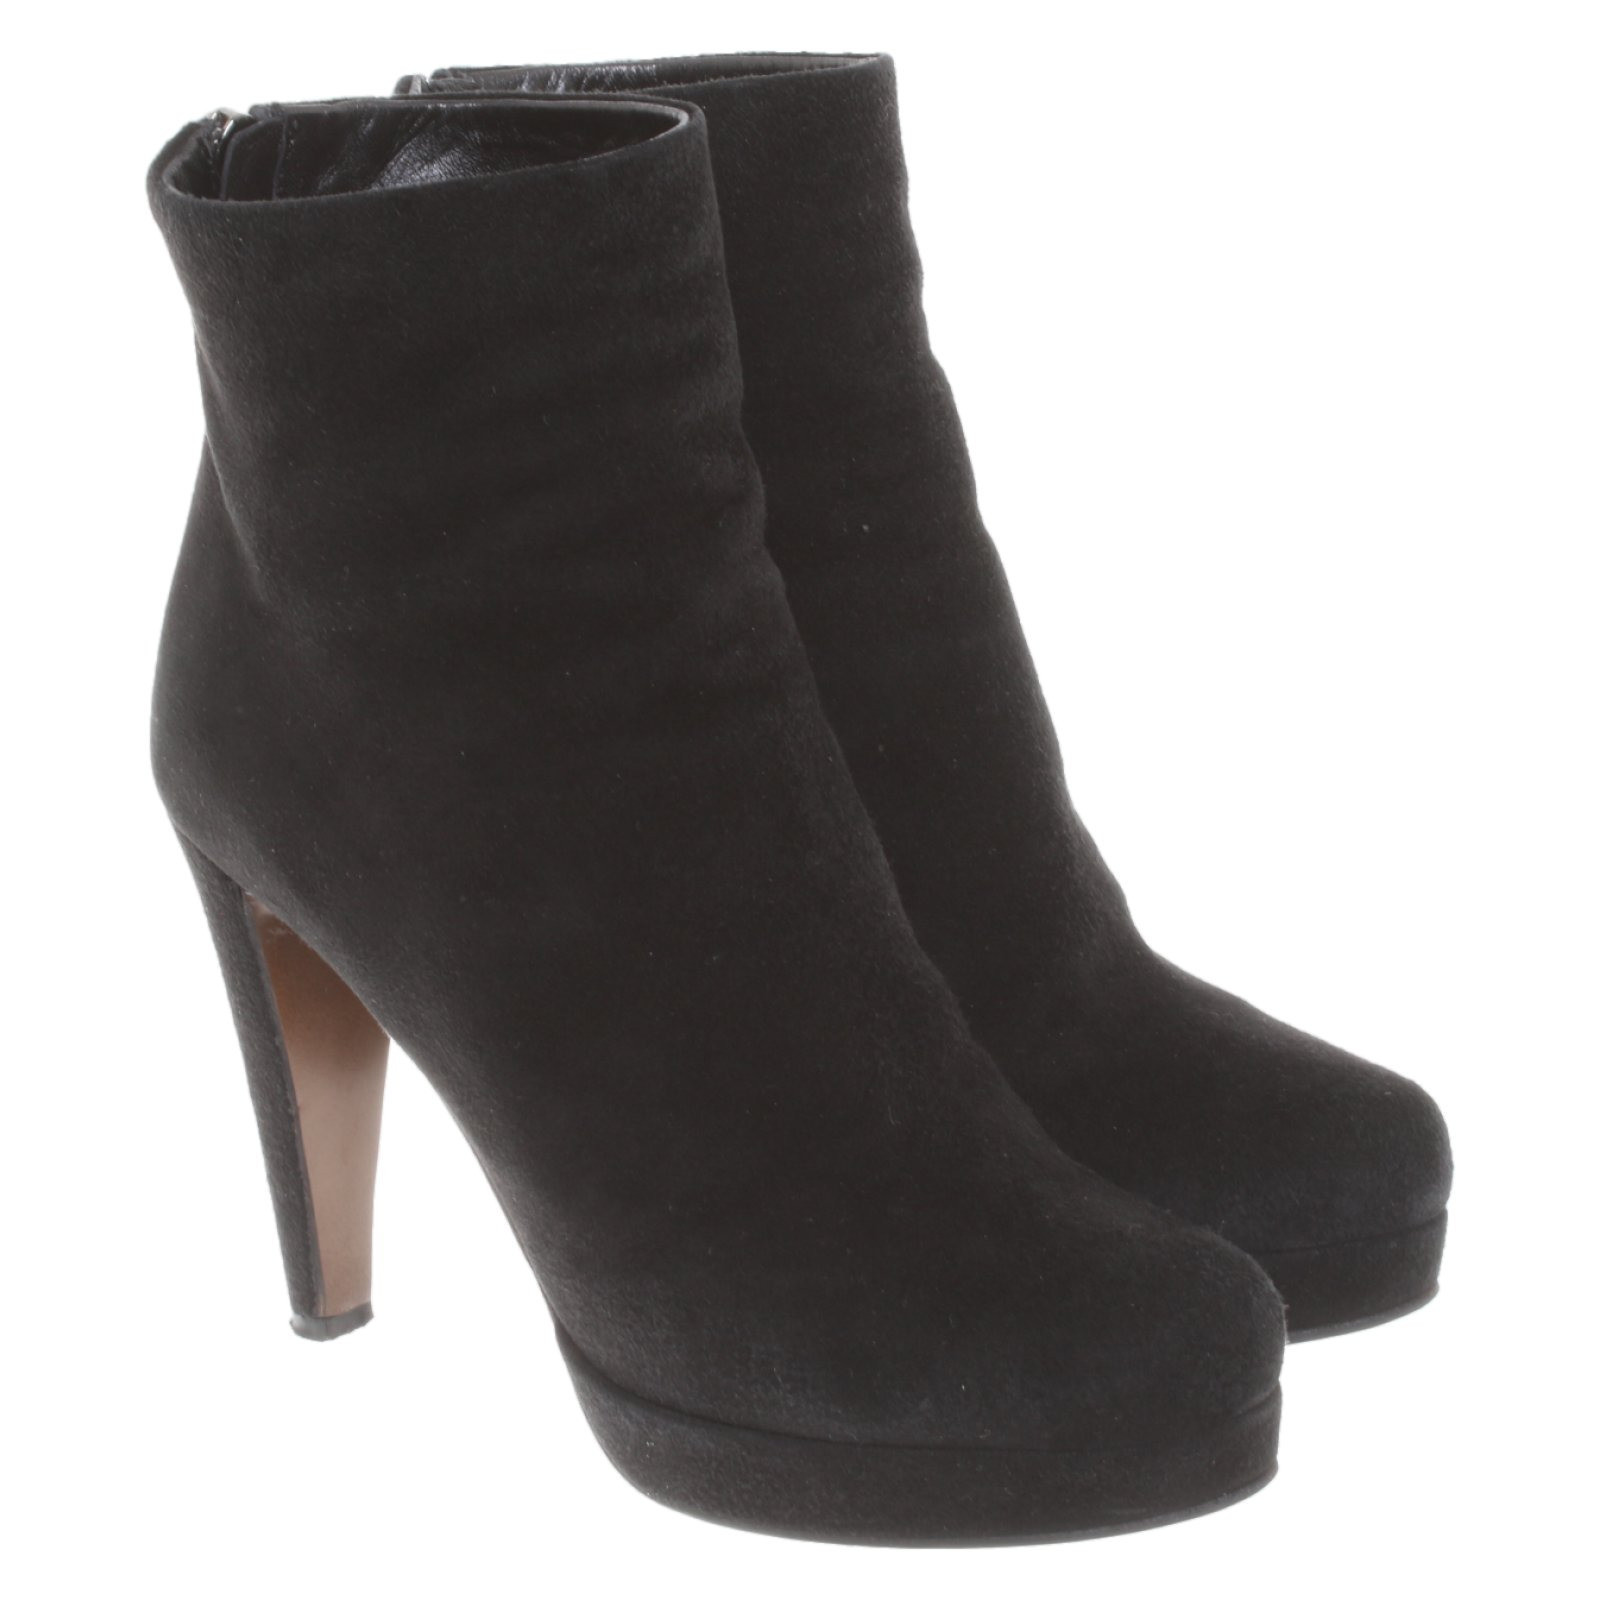 Walter Steiger Ankle Boots Suede In Black Second Hand Walter Steiger Ankle Boots Suede In Black Buy Used For 149